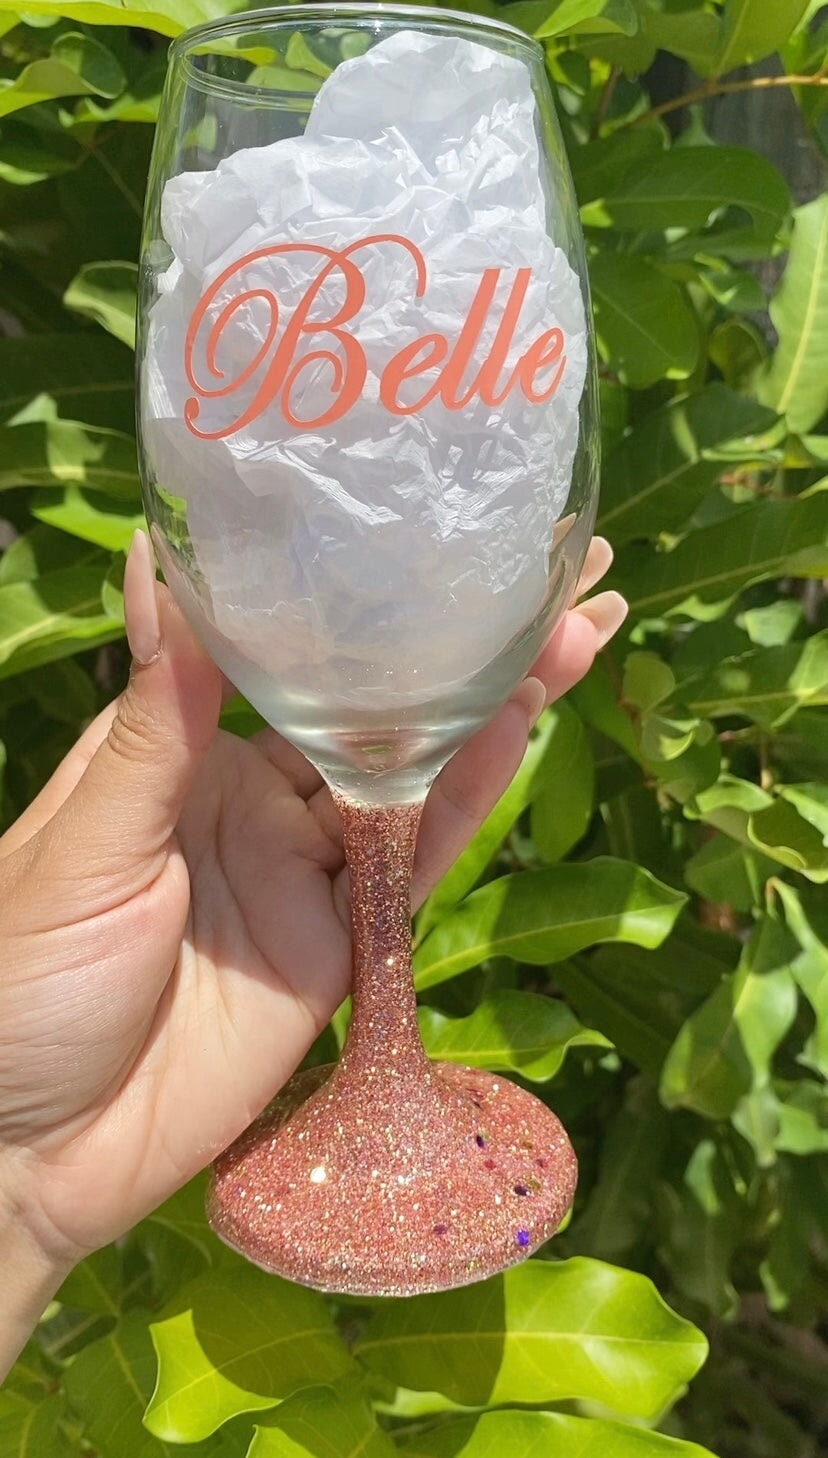 Glittered Stem Wine Glass Wine Glasses Personalize It By Belle 